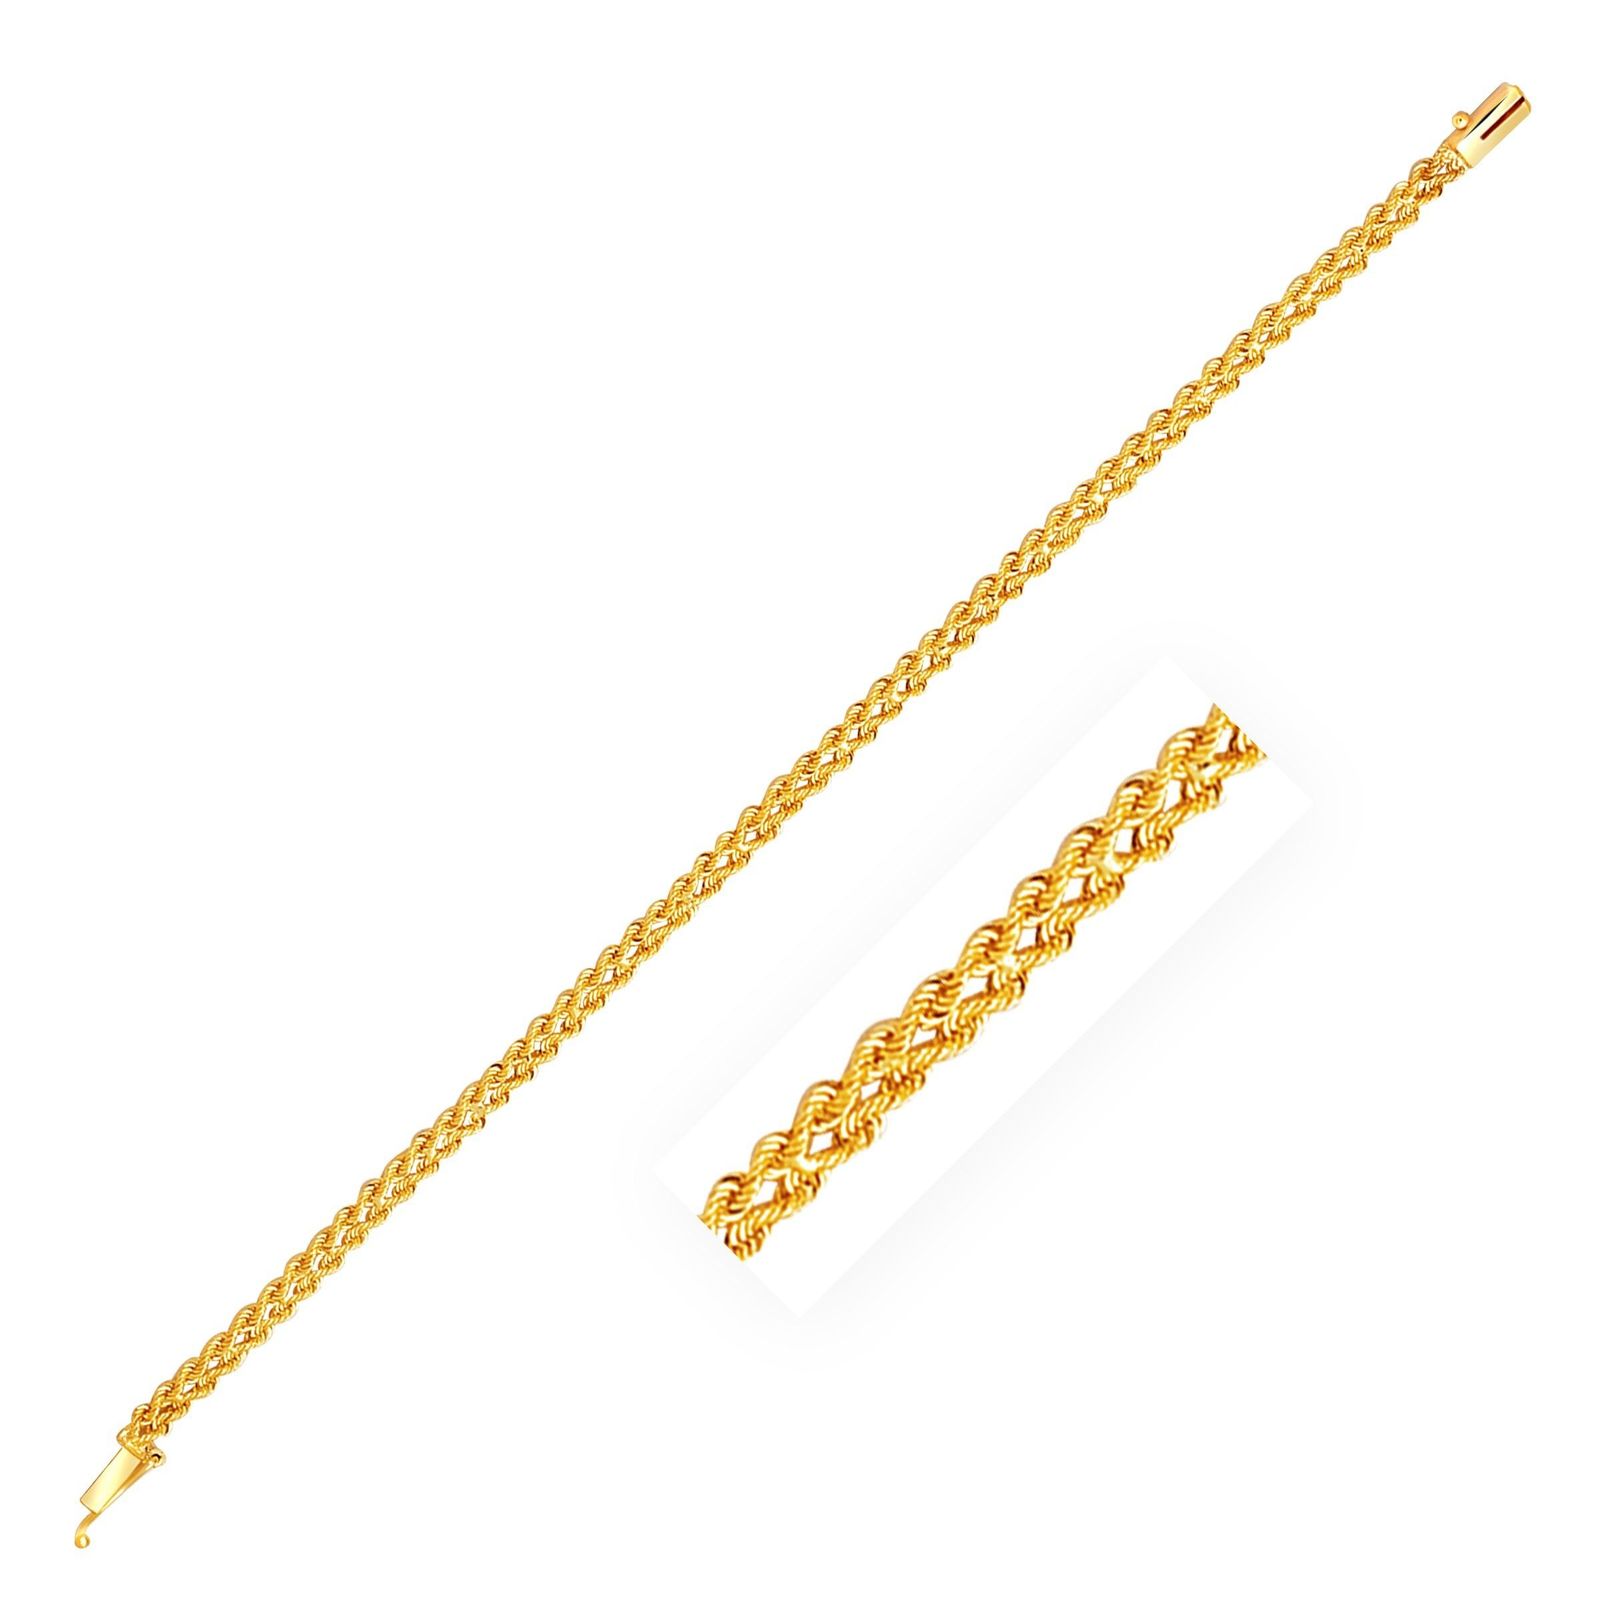 4.0 mm 14k Yellow Gold Two Row Rope Bracelet, size 7''